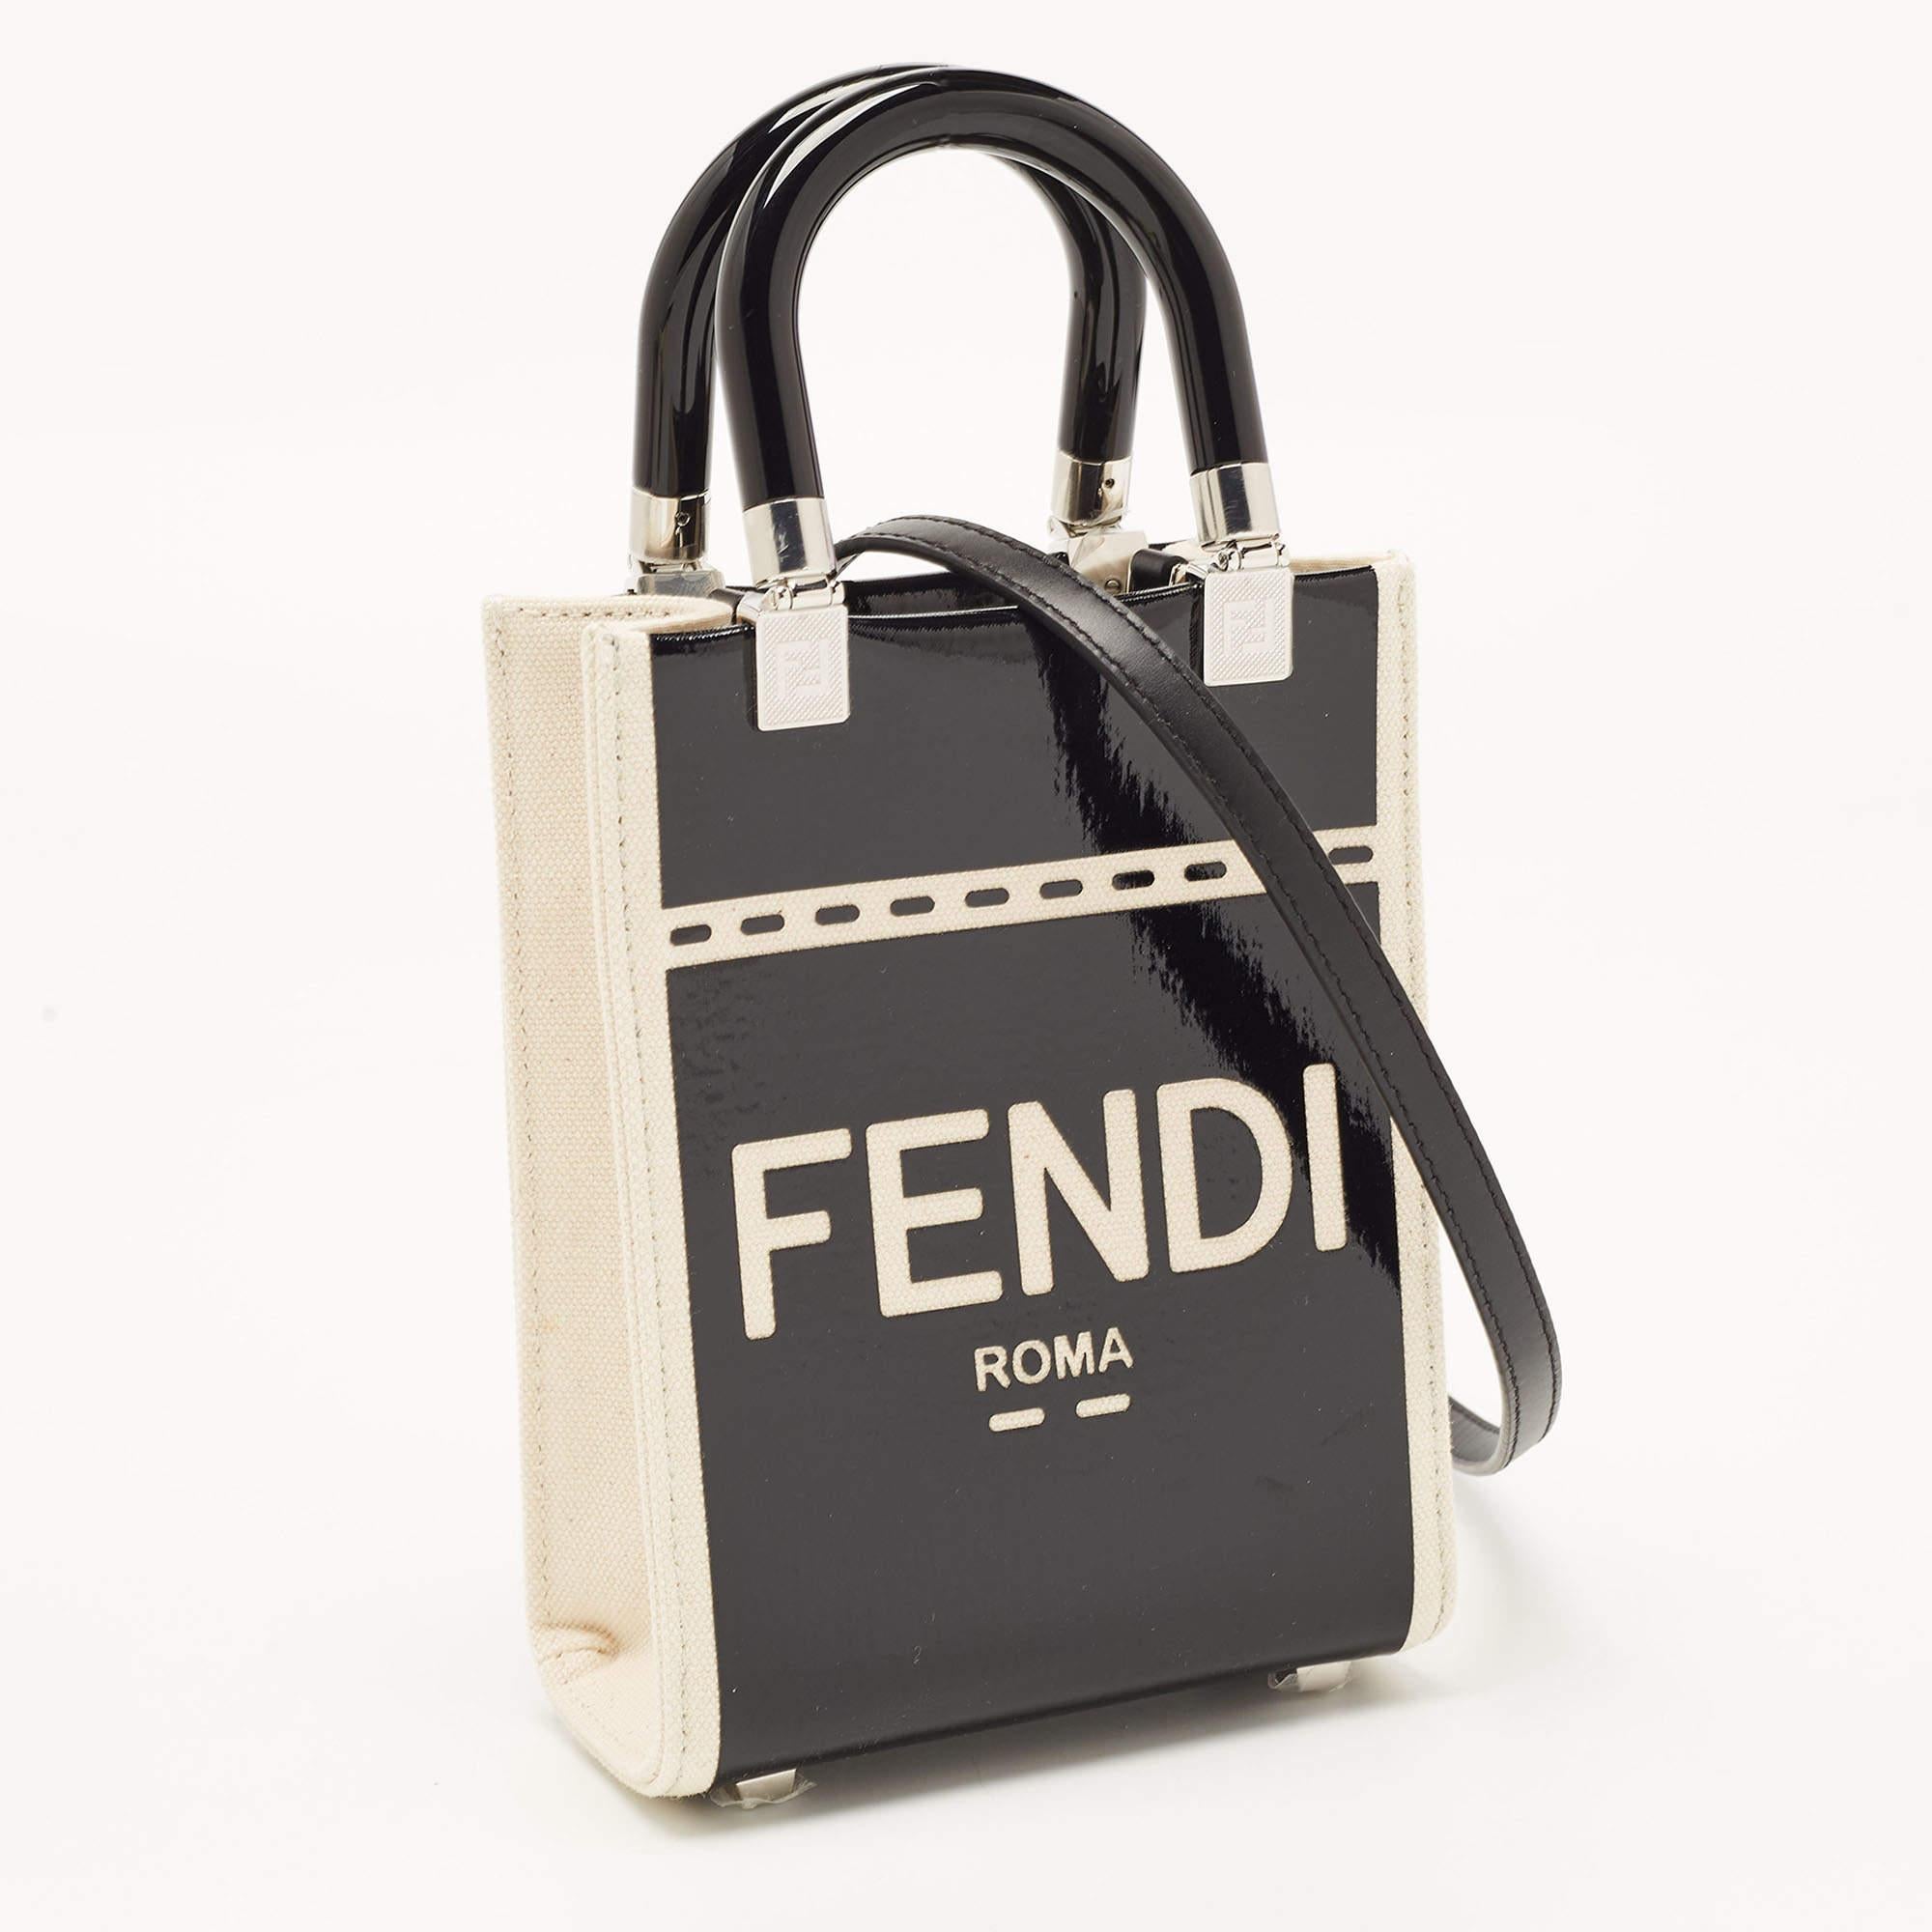 Know to create stylish, sophisticated, and timeless designs, this is a brand worth investing in. The bags that come from this label's atelier are exquisite. This Fendi tote bag is no different. It has been made from quality materials and comes with